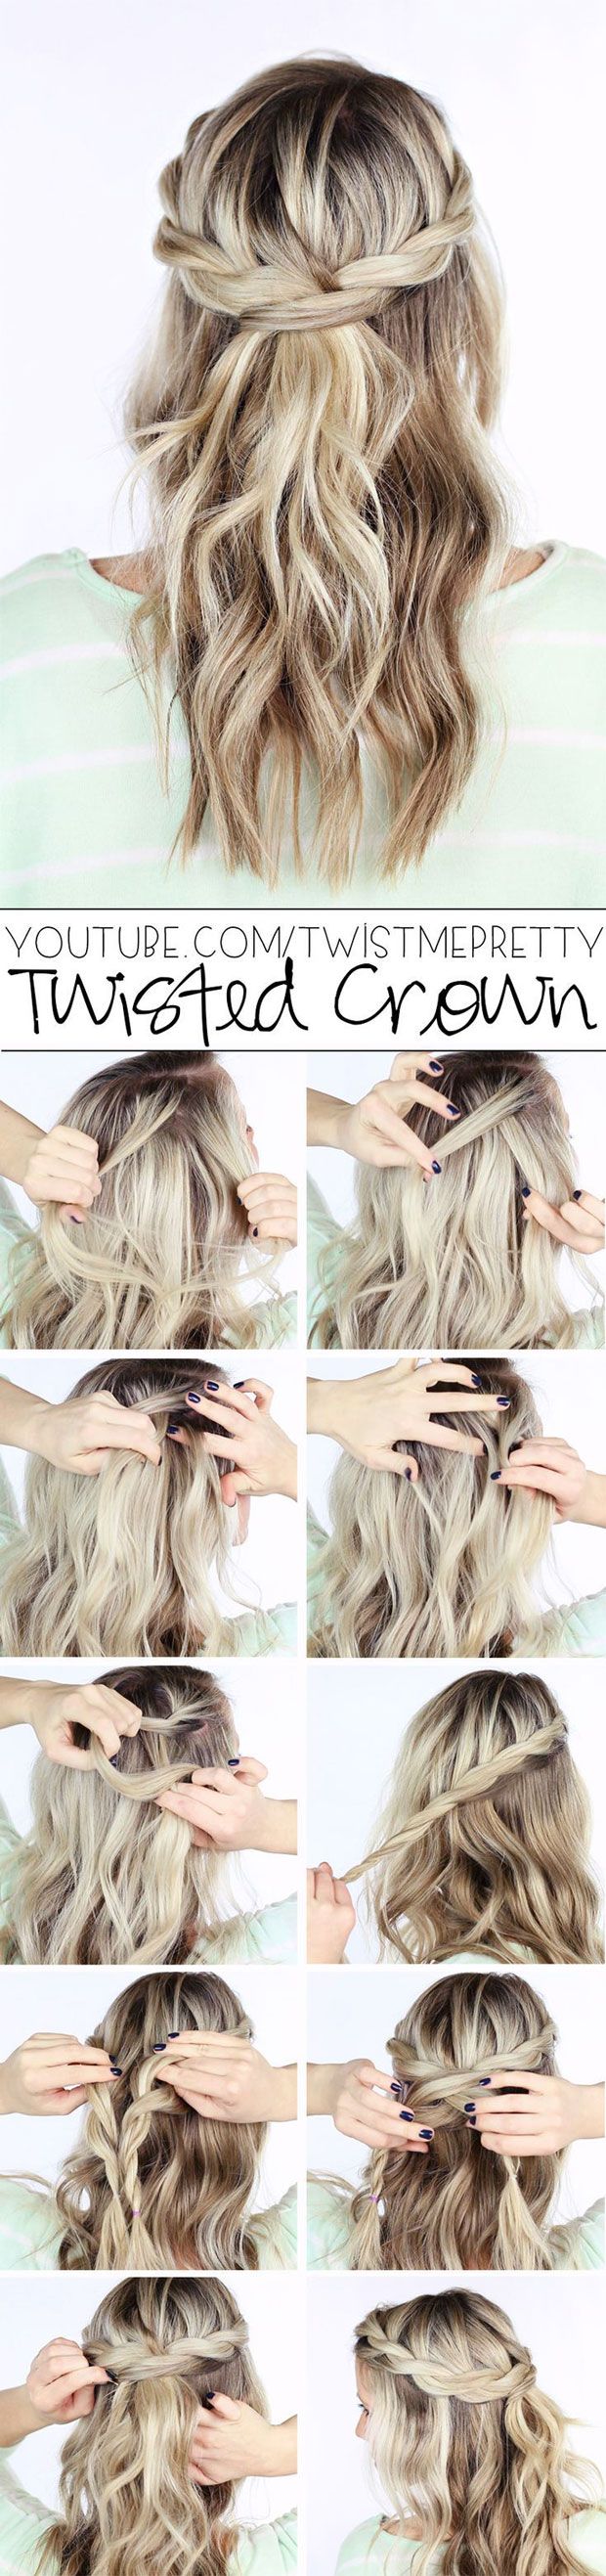 Twisted Crown Hairstyle Tutorial